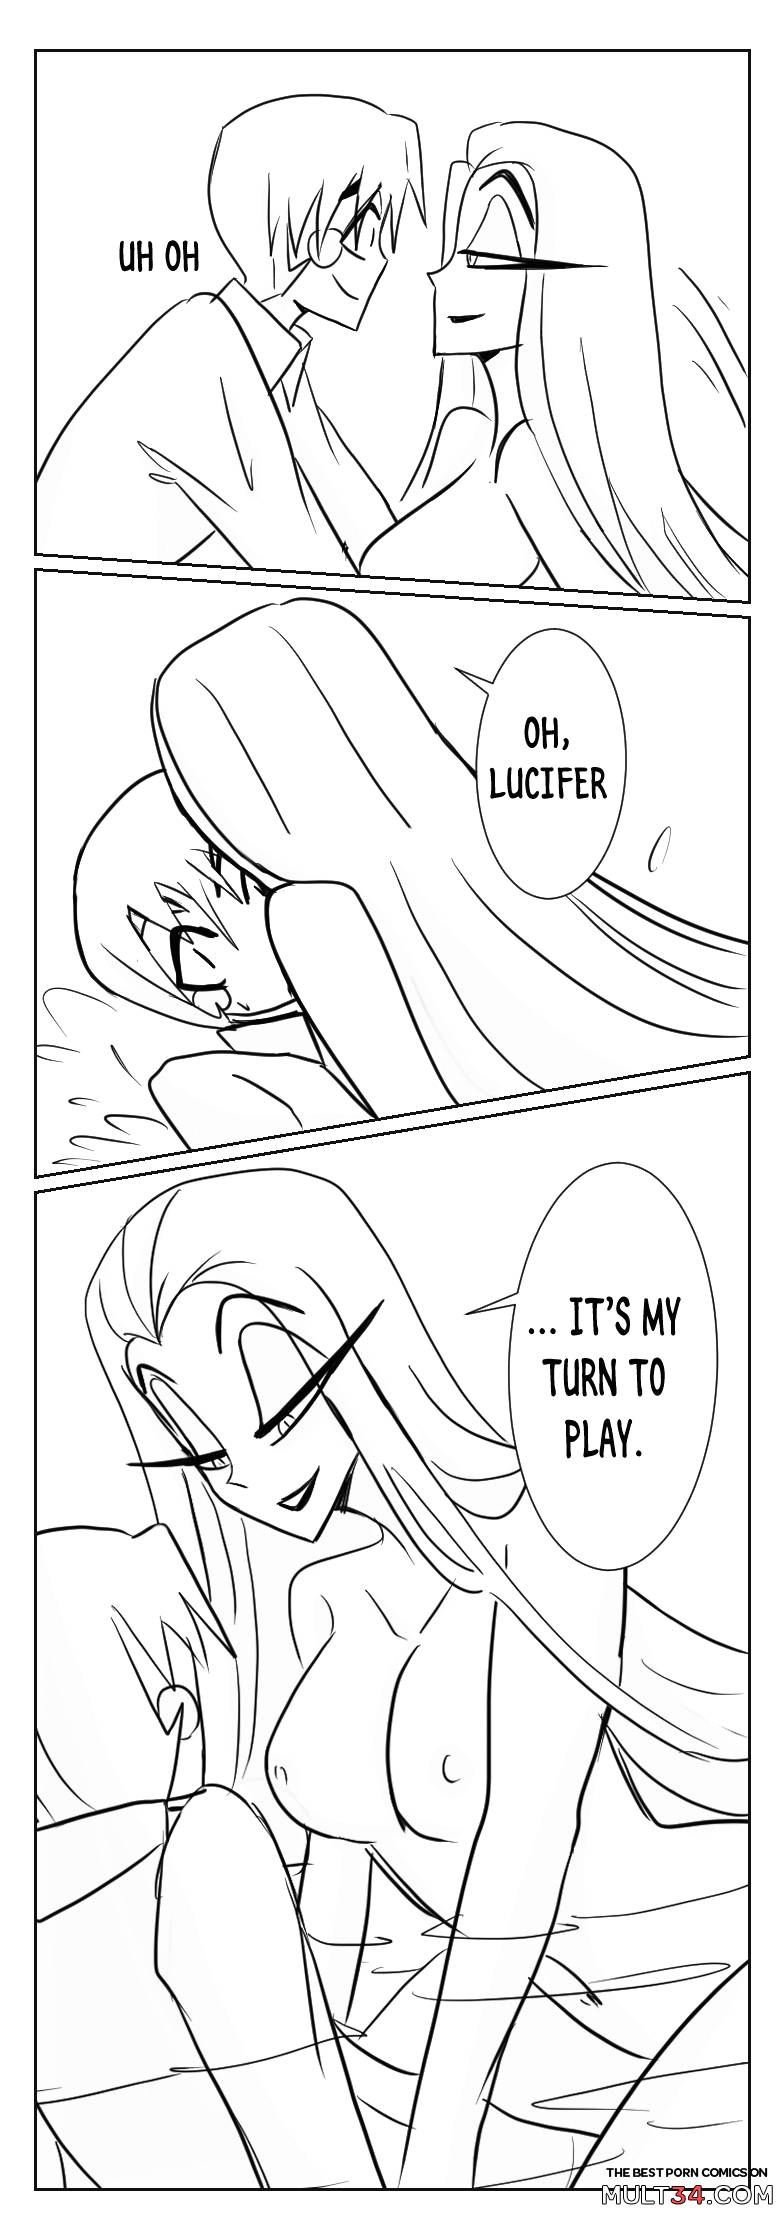 Lucifer and lilith page 8